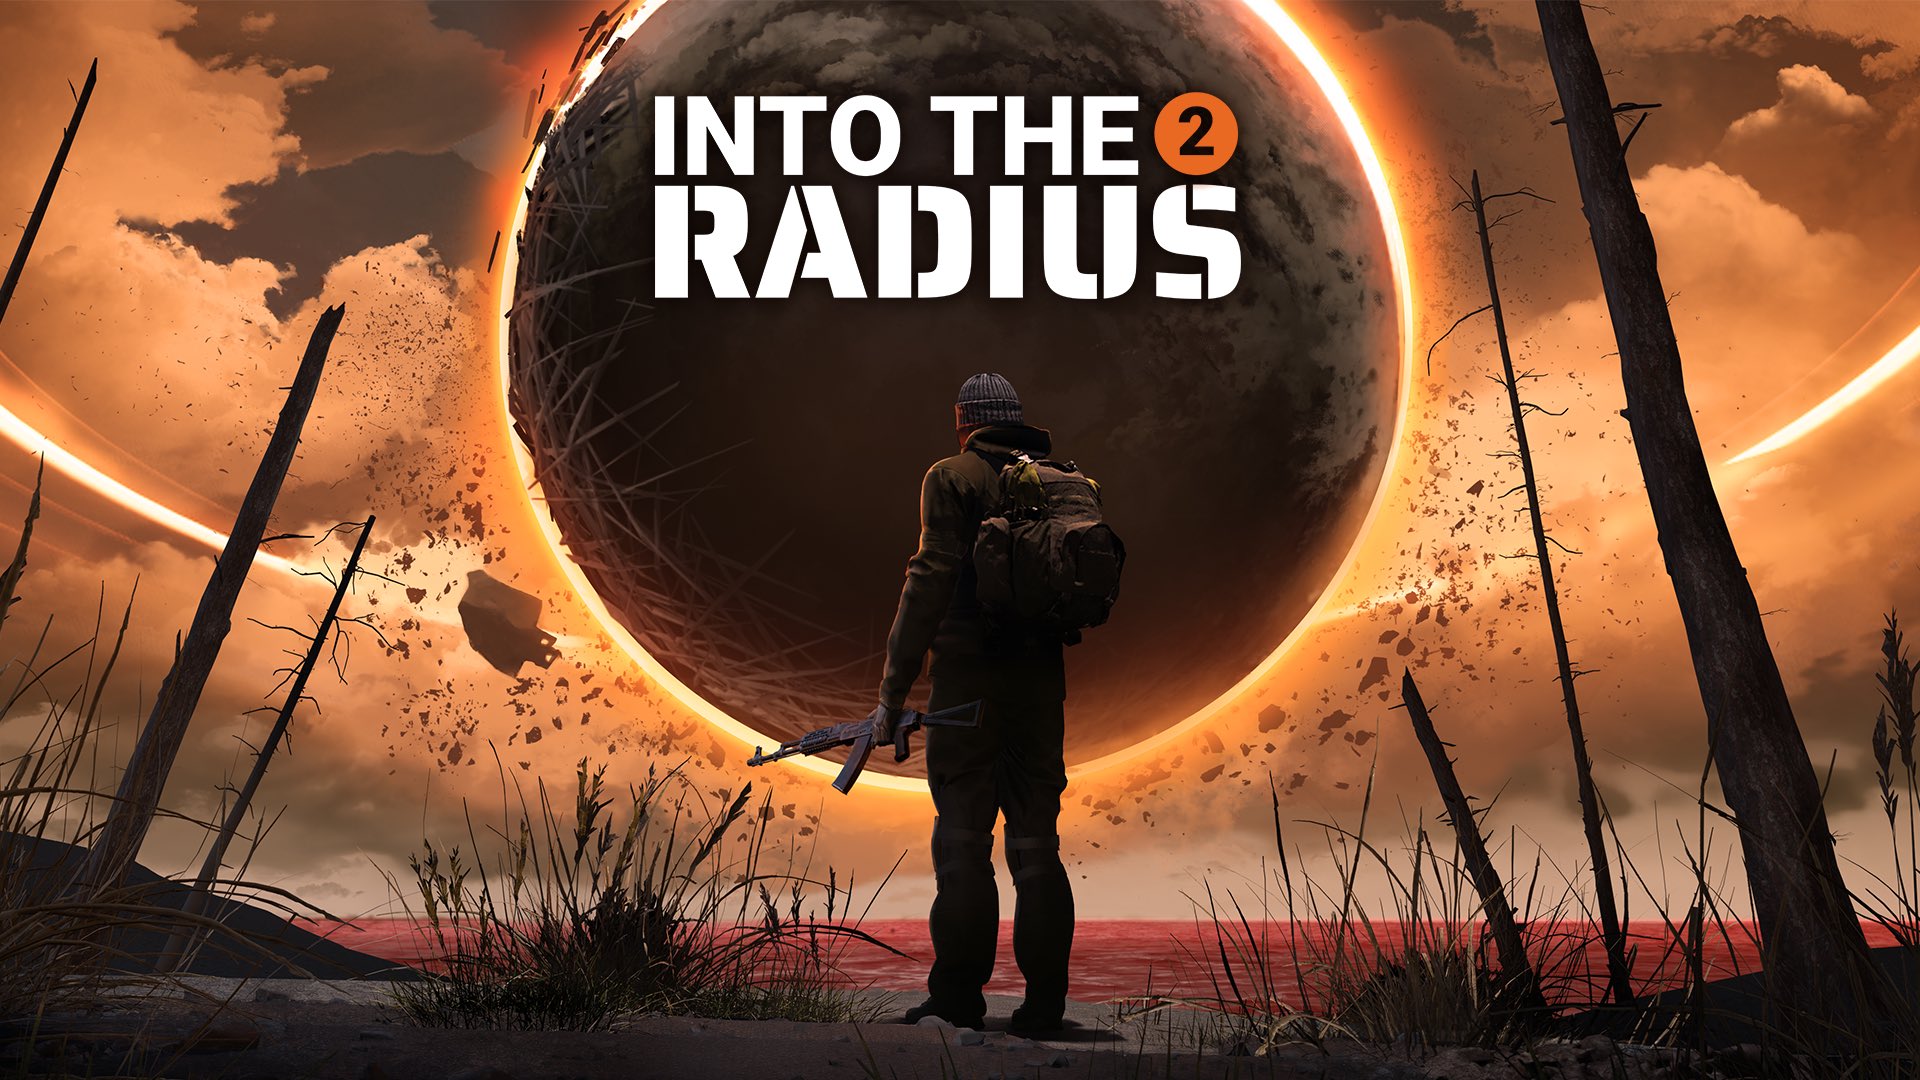 ‘Into the Radius 2’ Releases in Early Access on PC VR Today, Including Two-Player Co-op